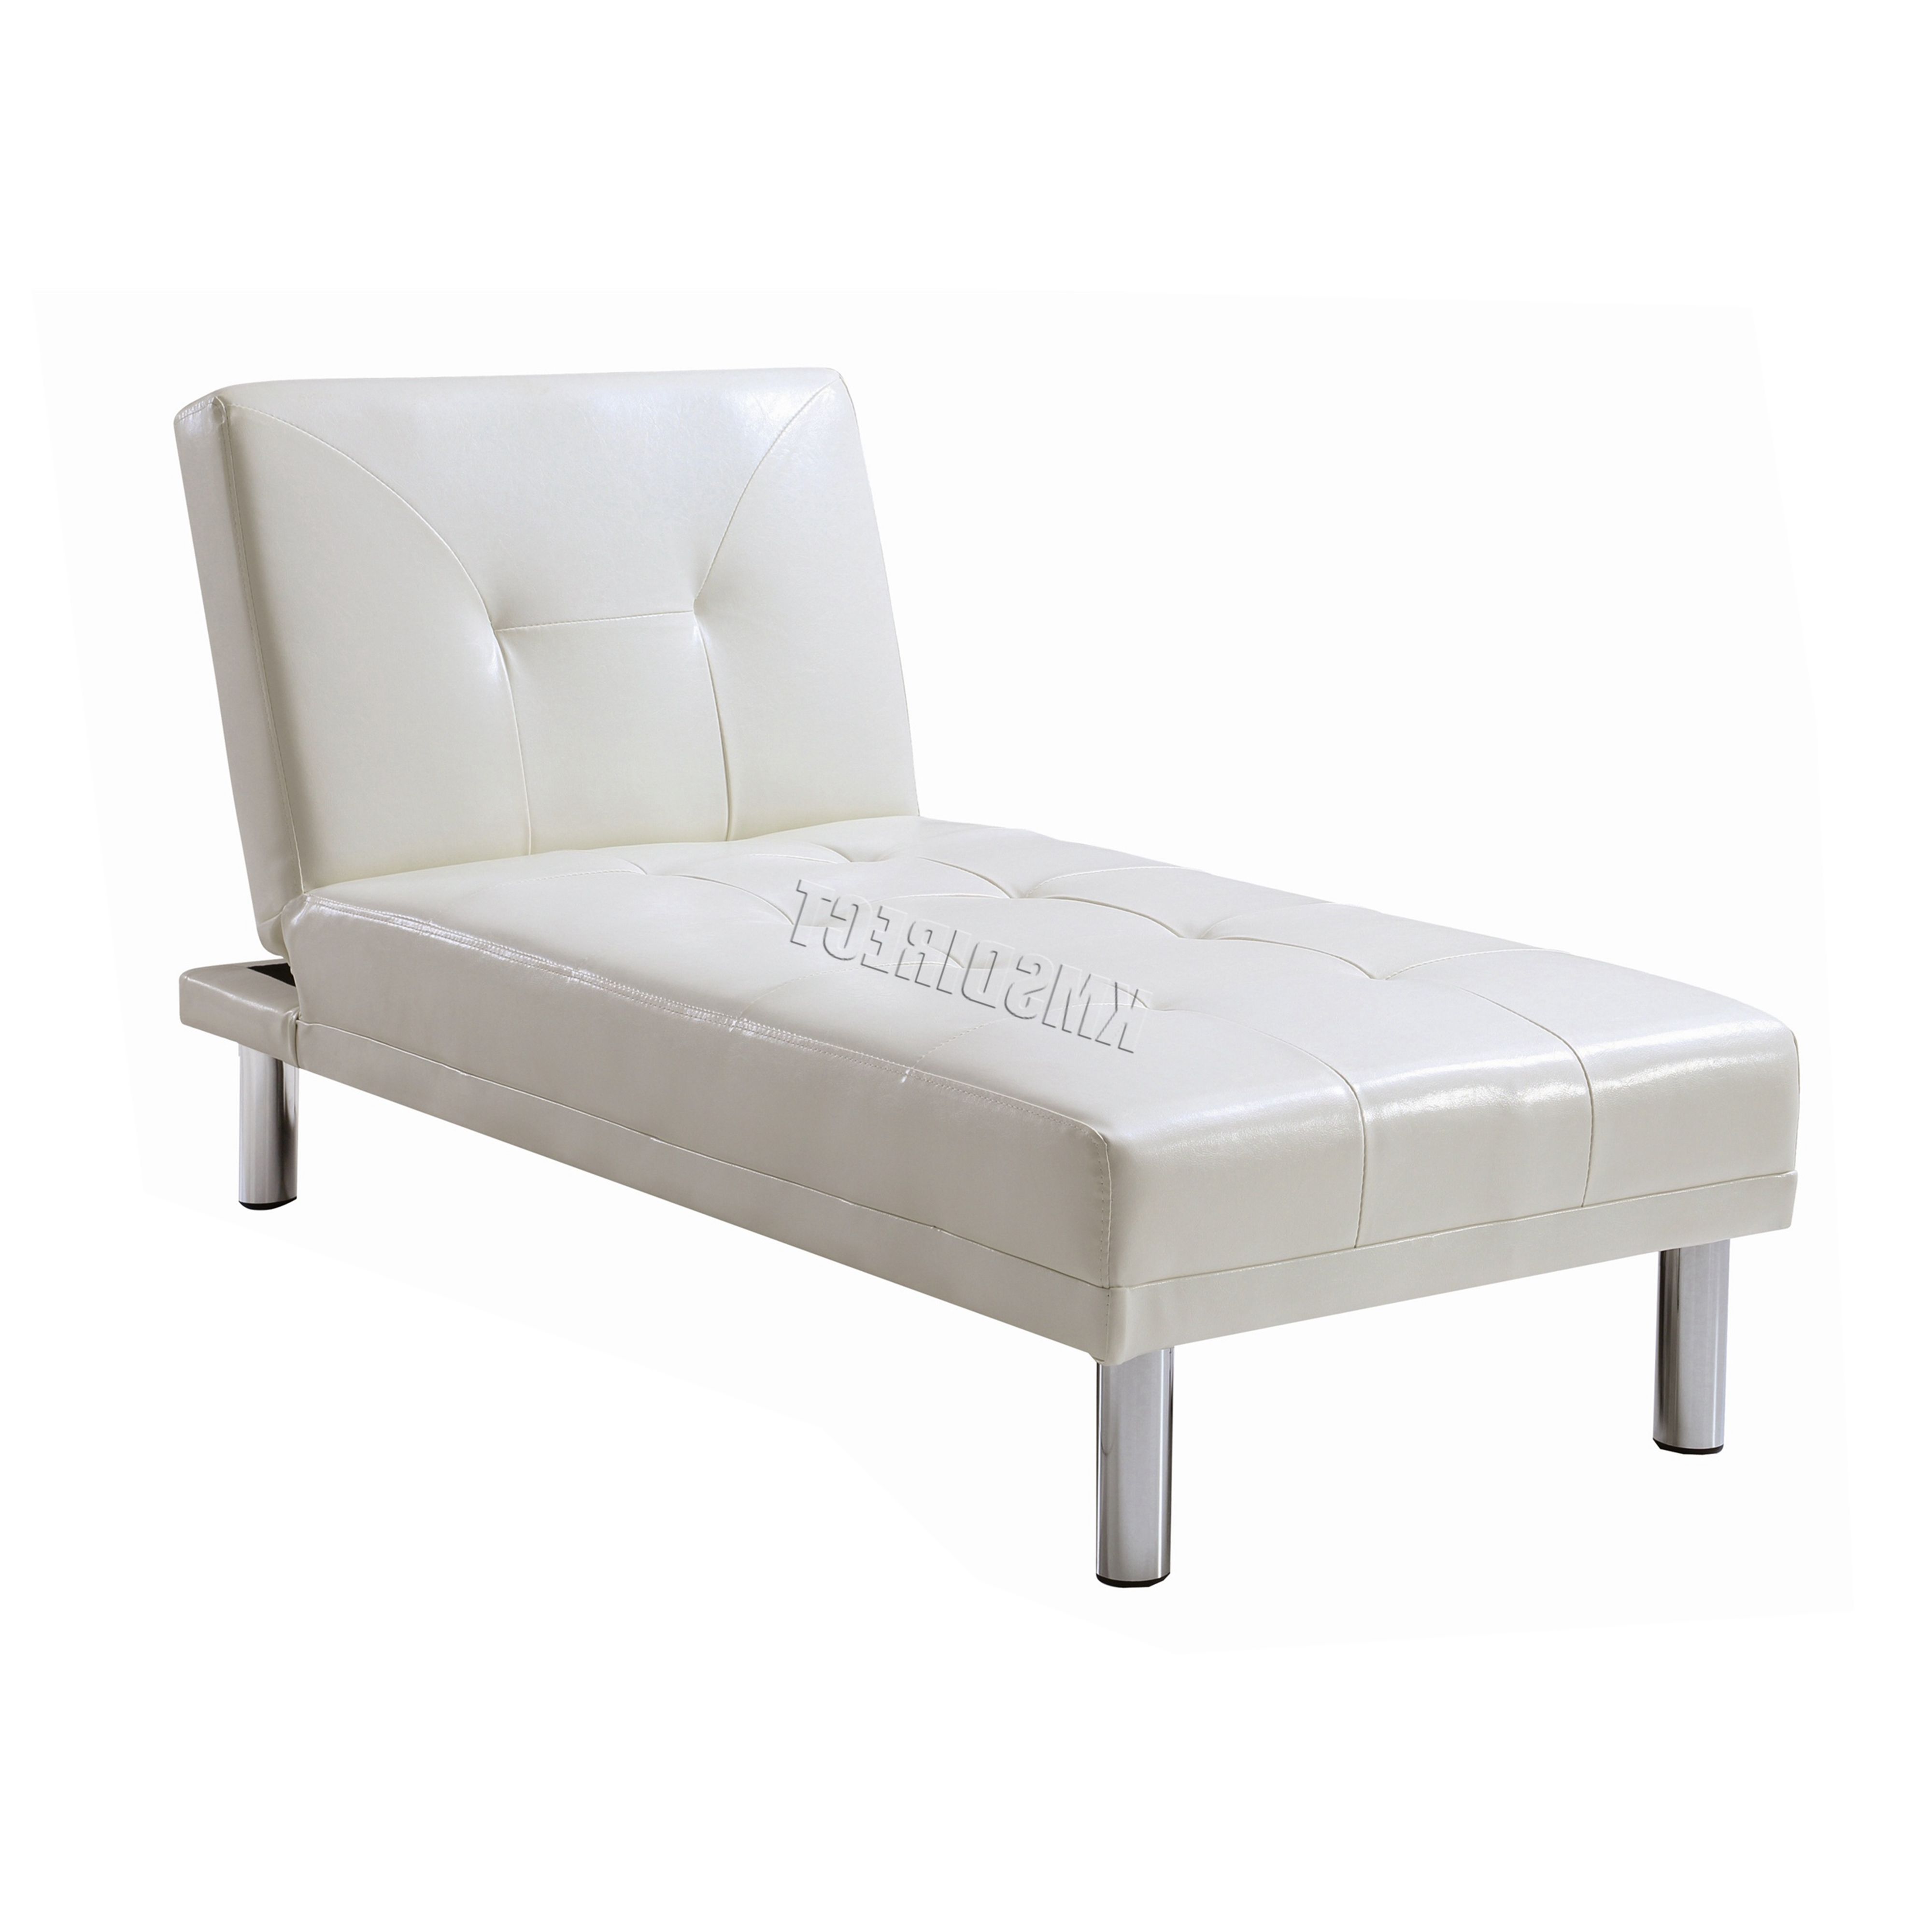 Westwood Chaise Longue Single Sofa Bed 1 Seater Couch Faux Leather Inside Recent Chaise Lounge Beds (View 7 of 15)